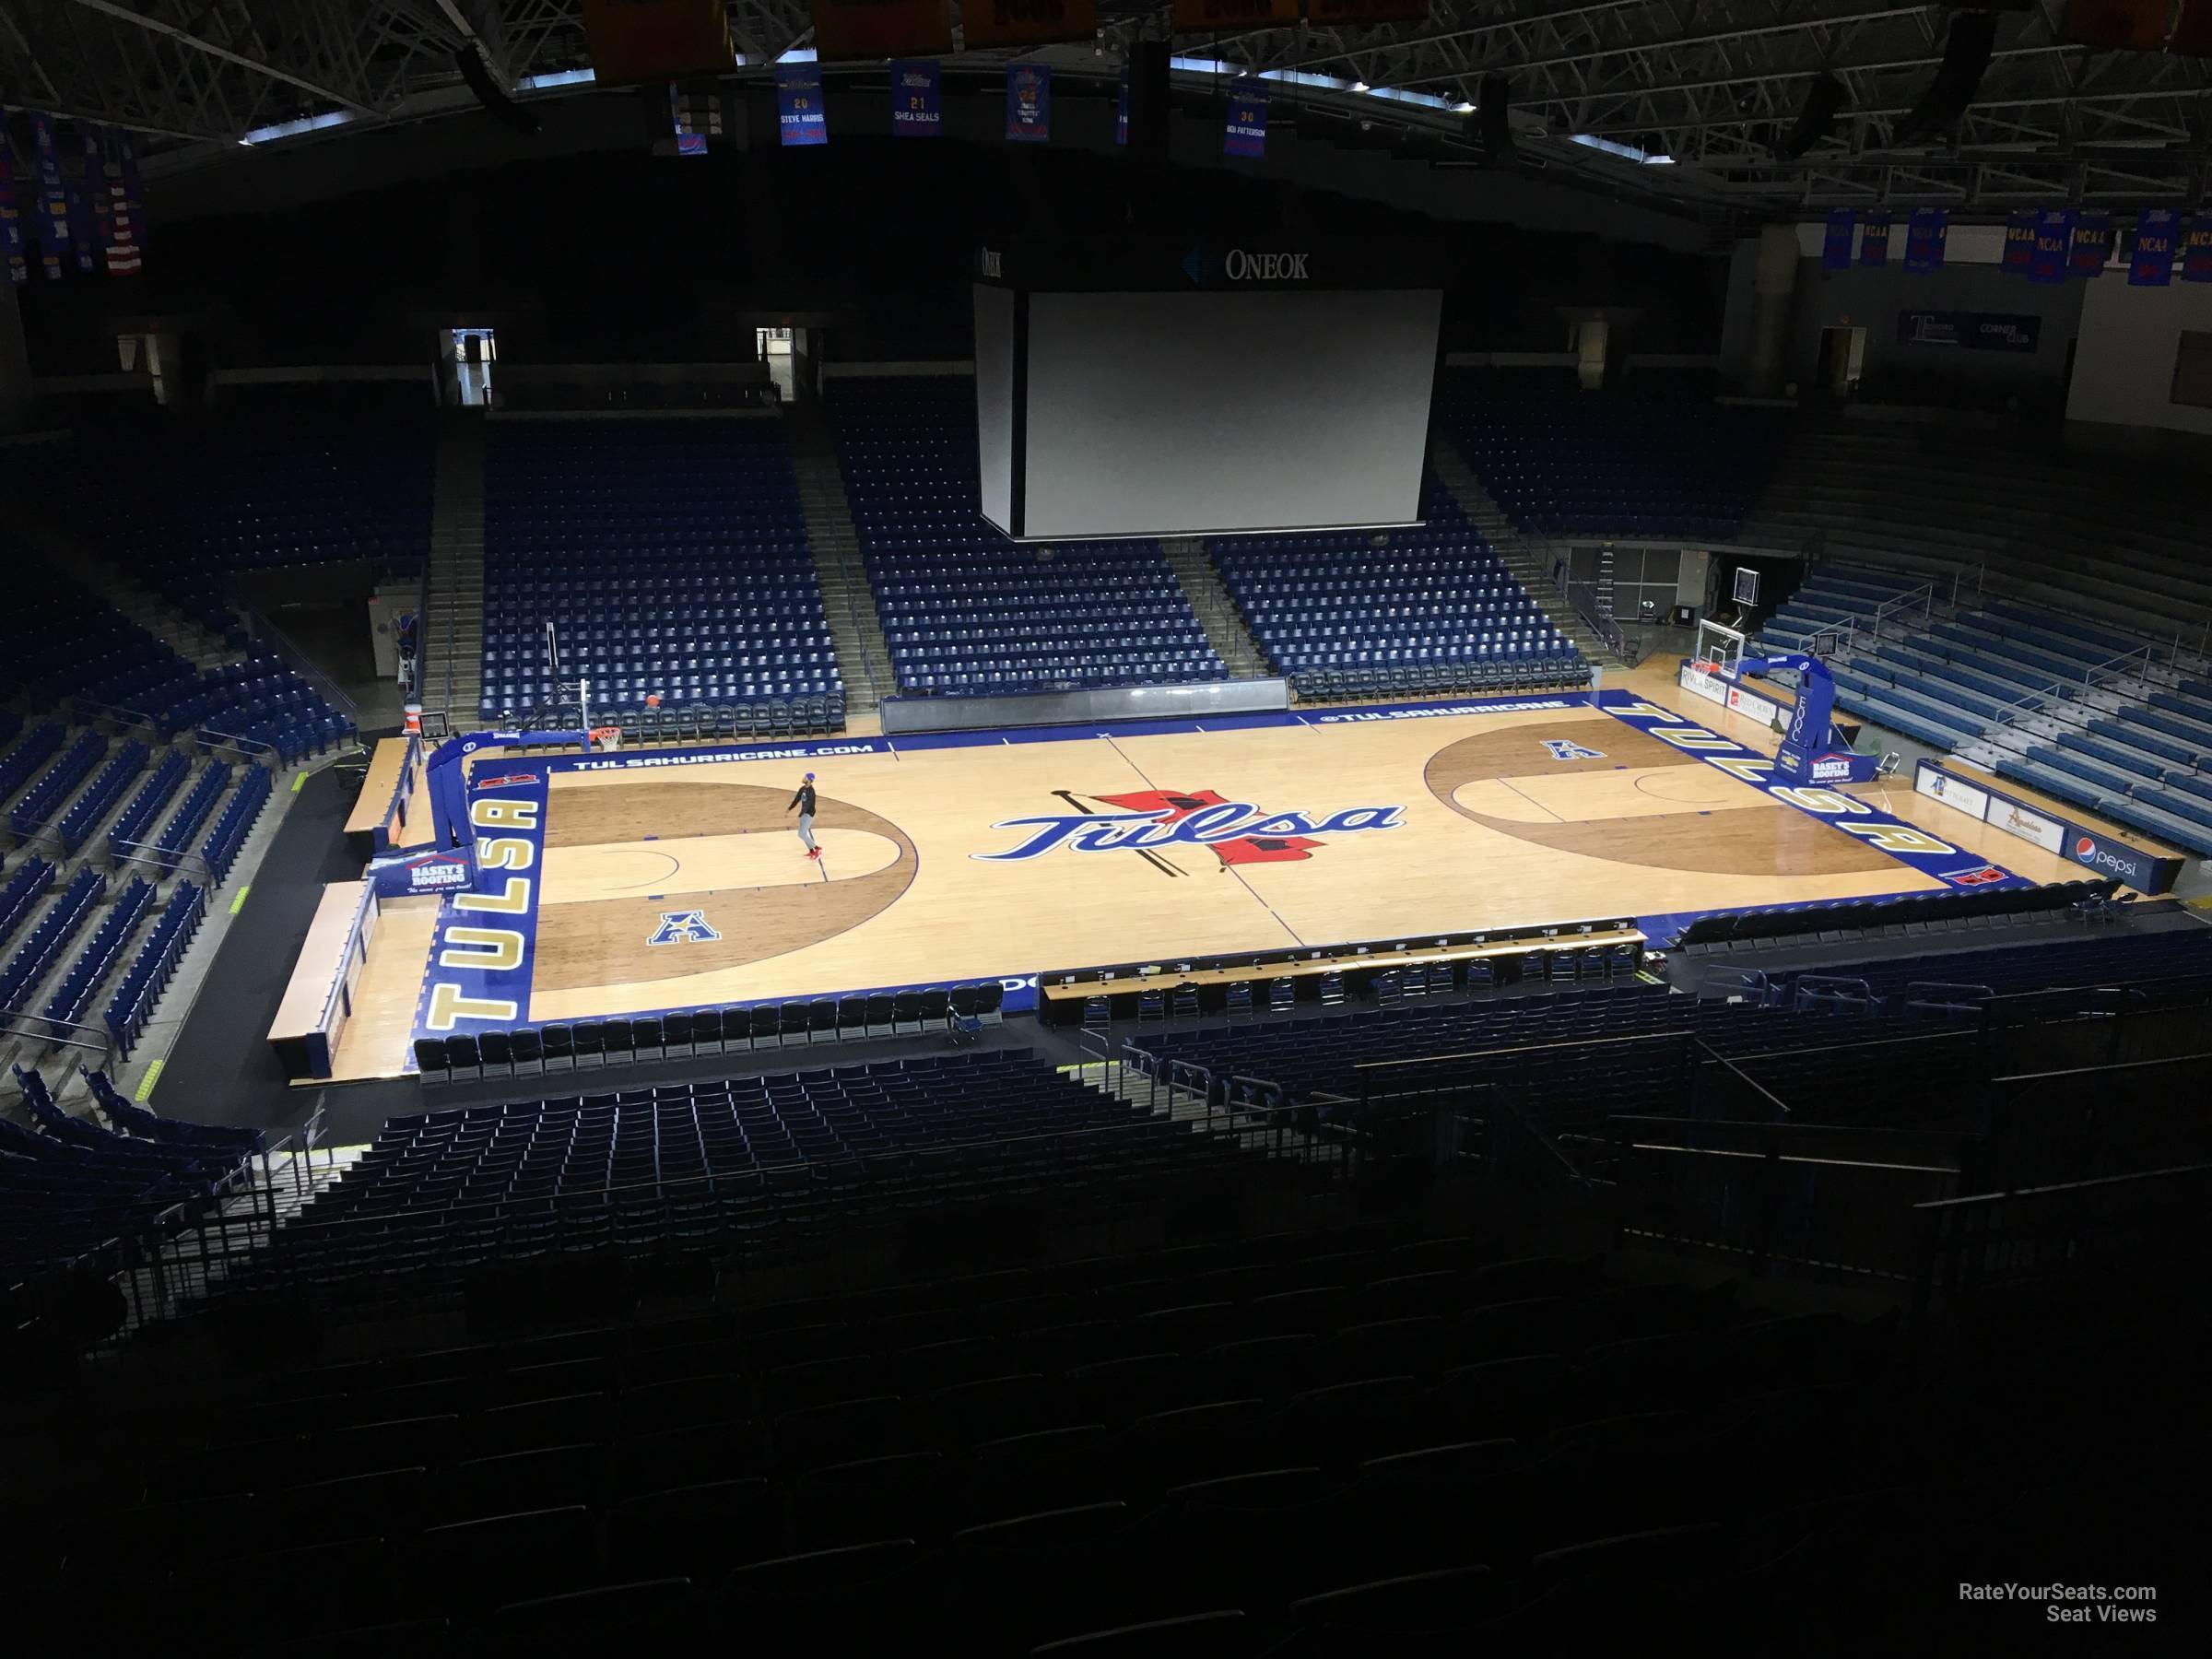 section 215, row j seat view  - reynolds center